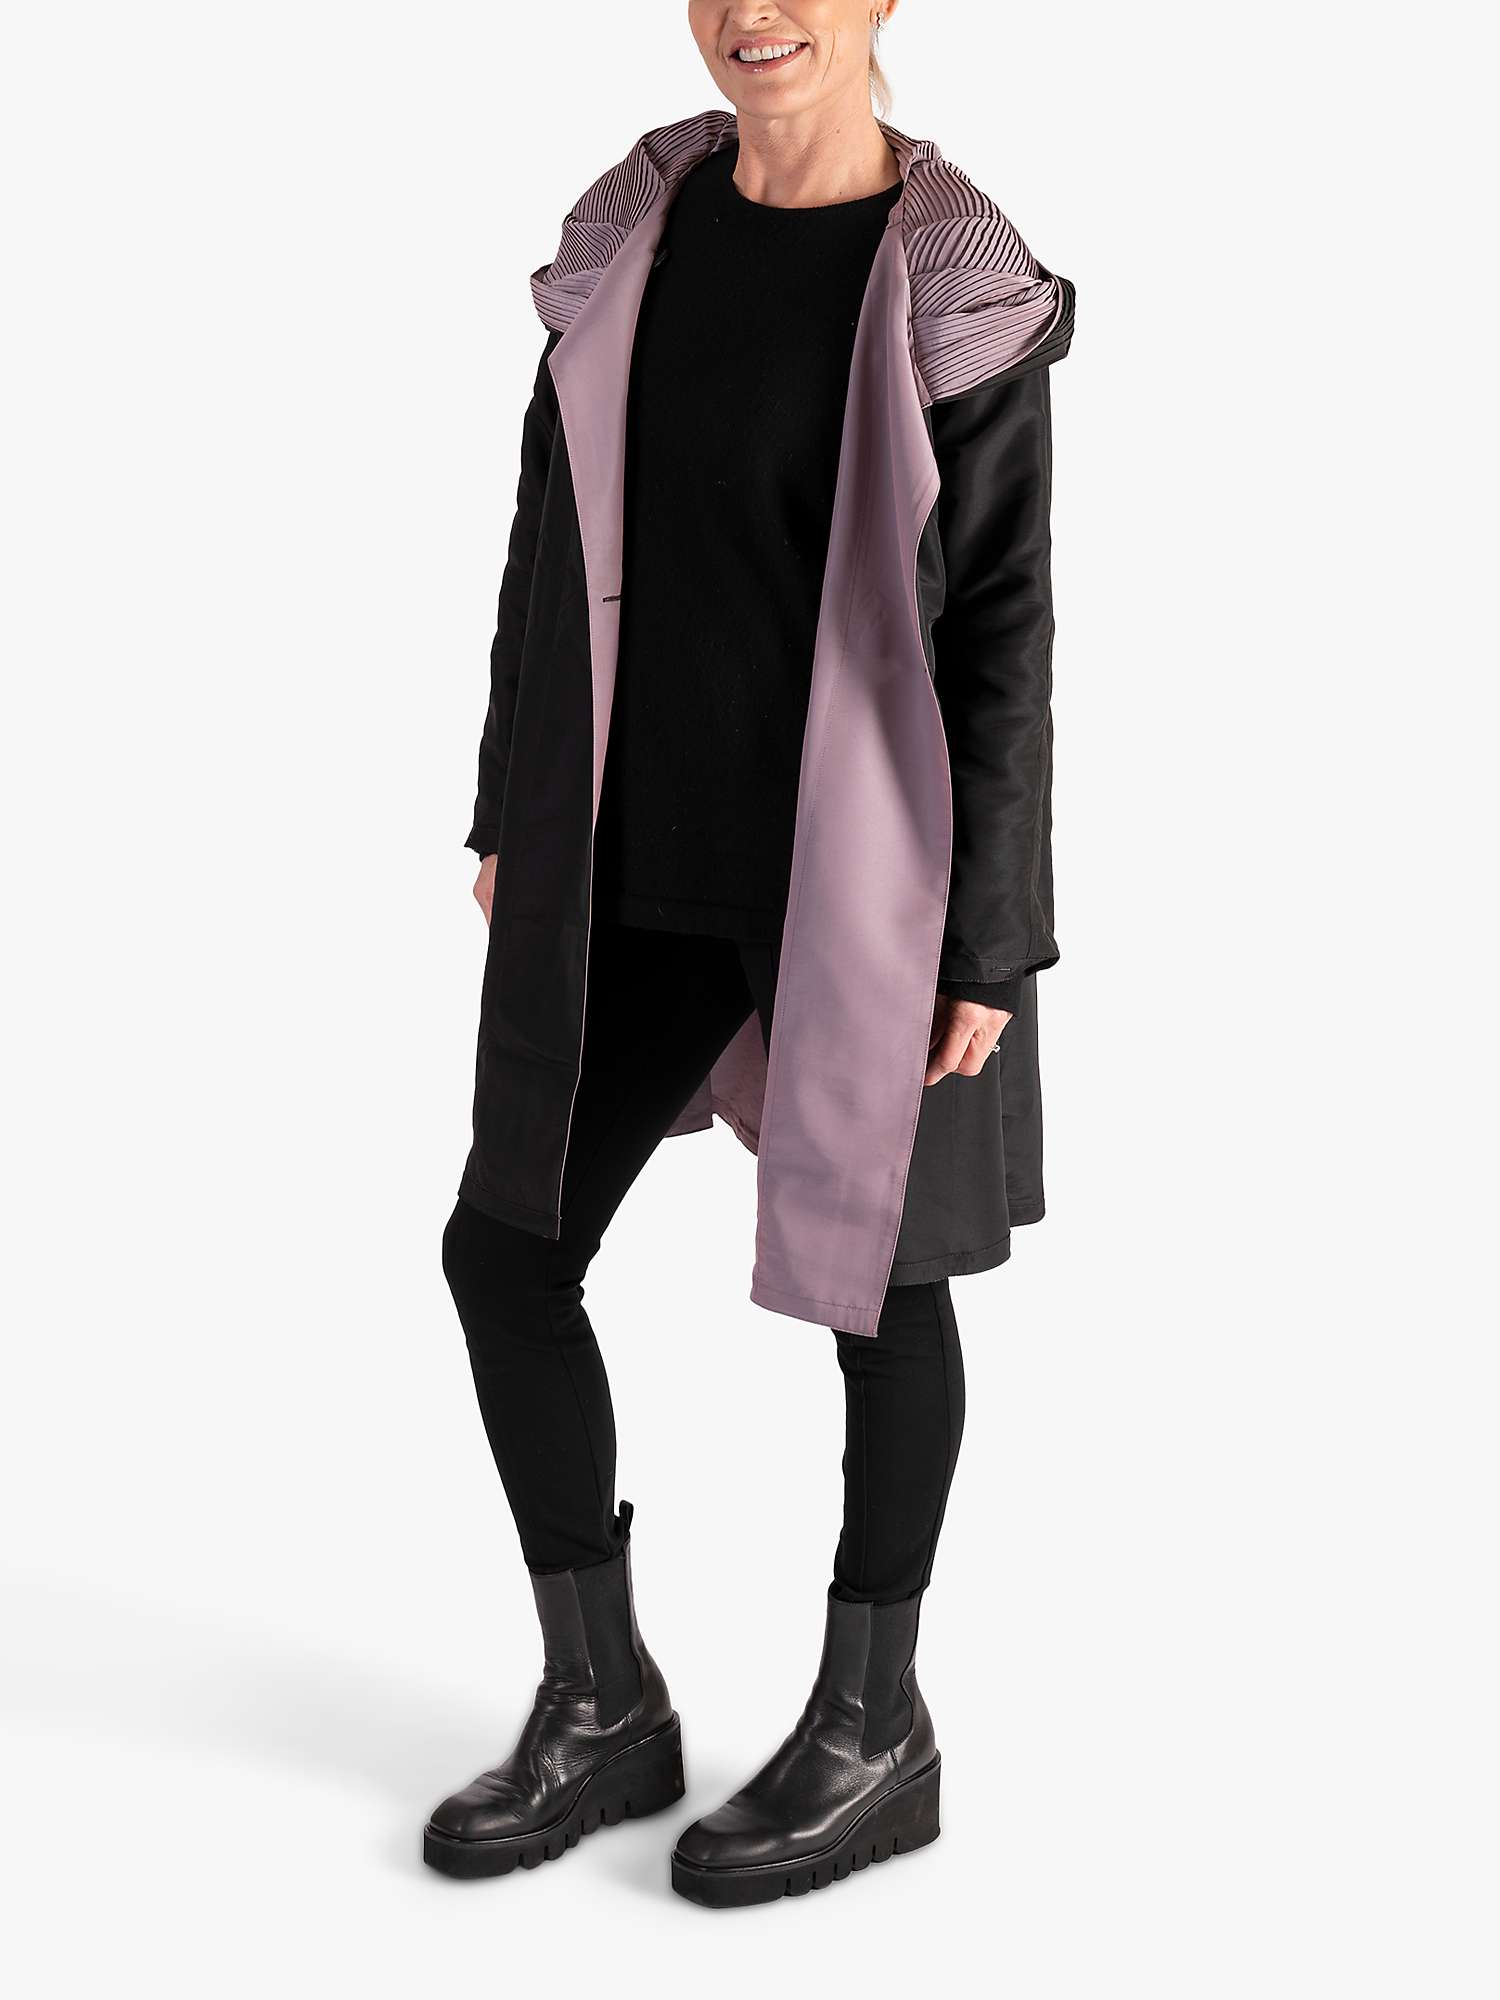 Buy chesca Accordian Collar Hooded Reversible Raincoat Online at johnlewis.com